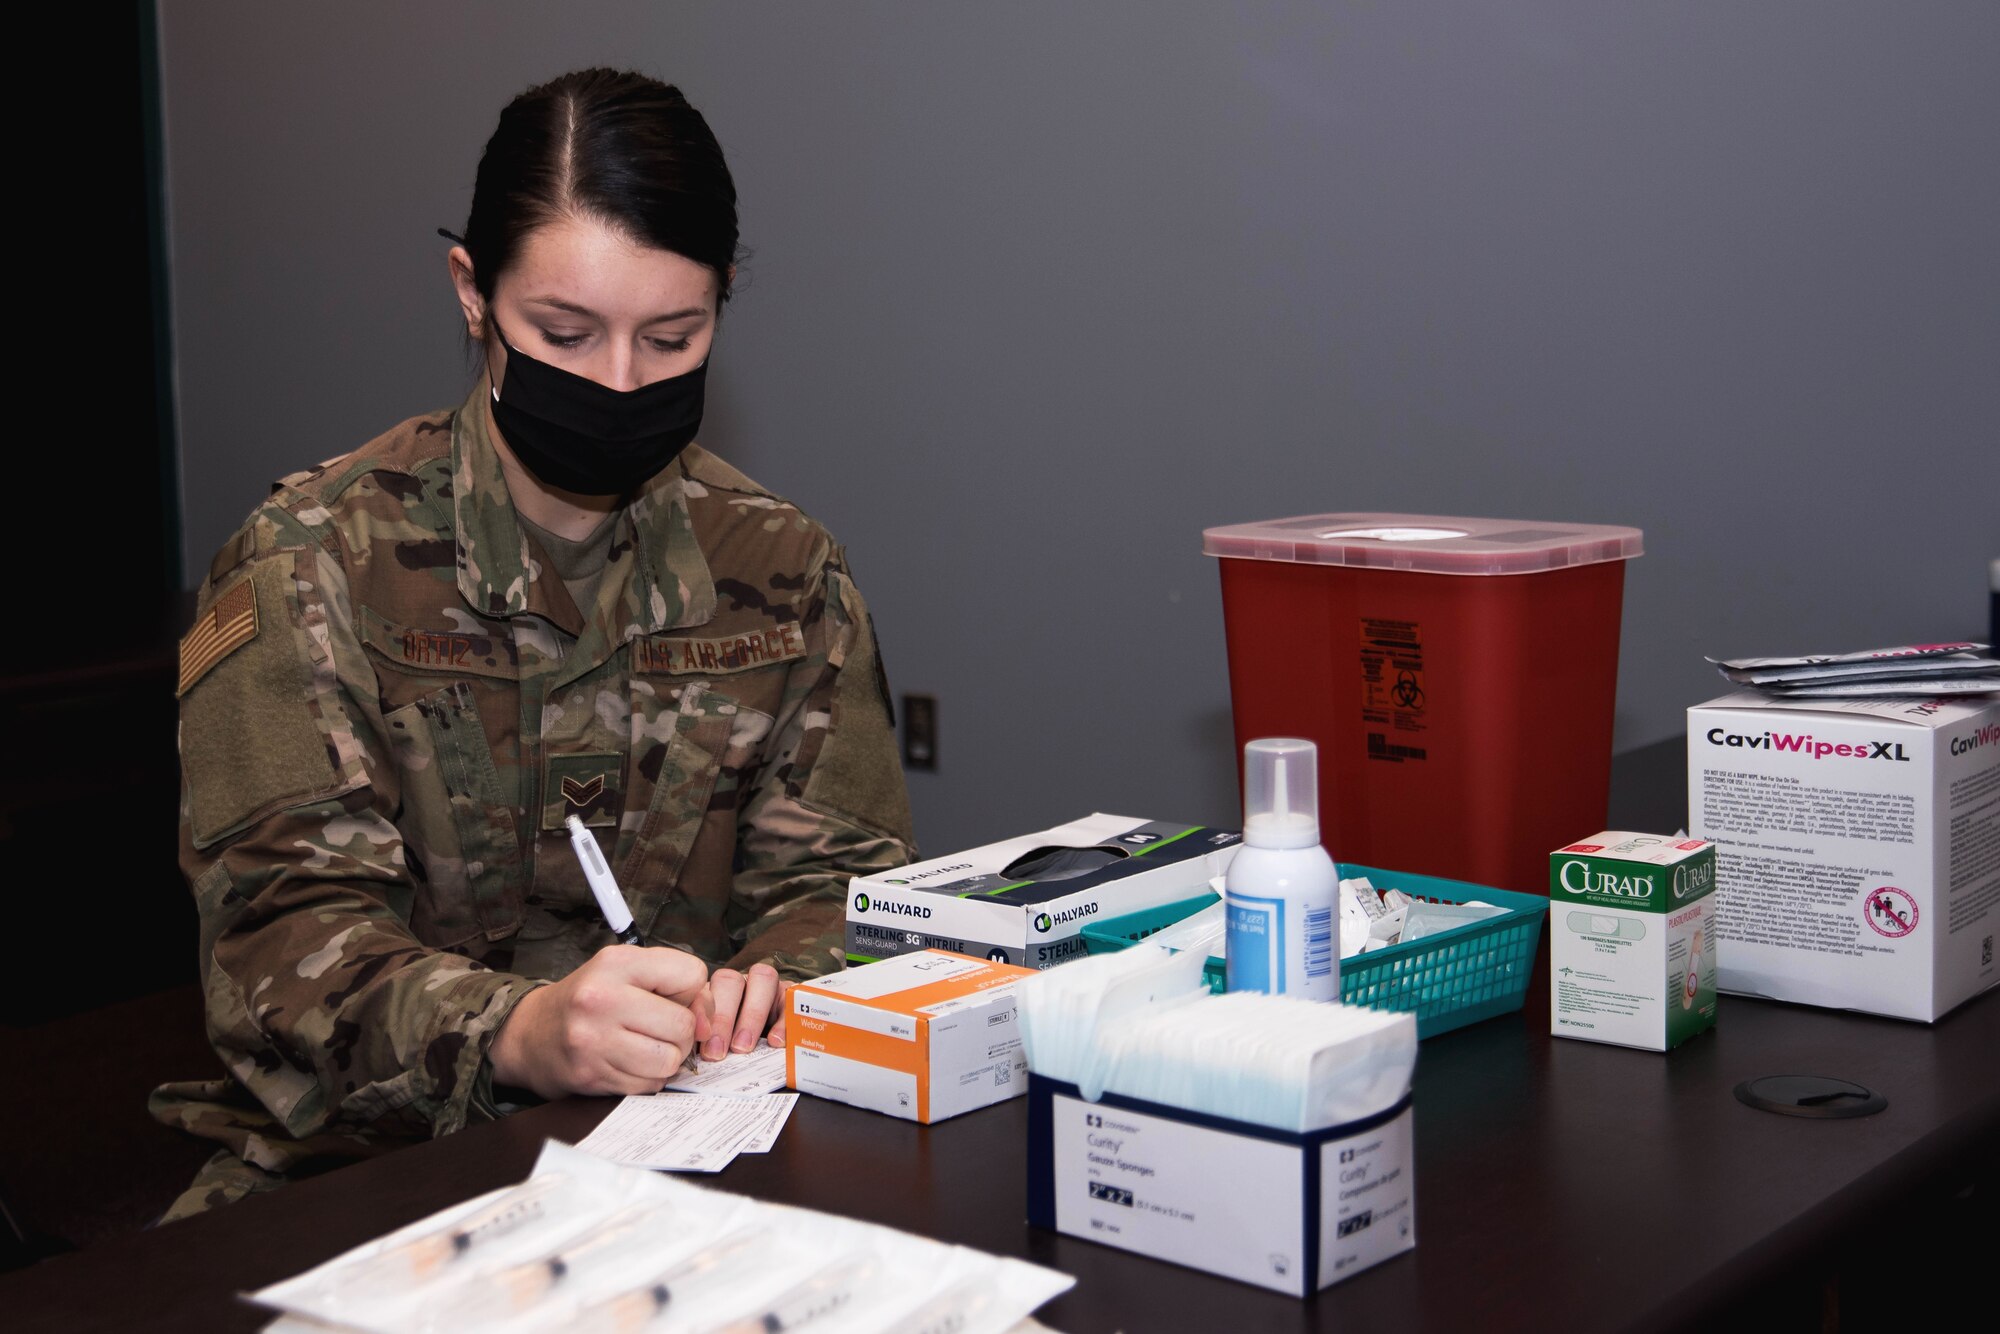 An Airman prepares COVID-19 vaccine paperwork while sitting at a table with medical supplies.